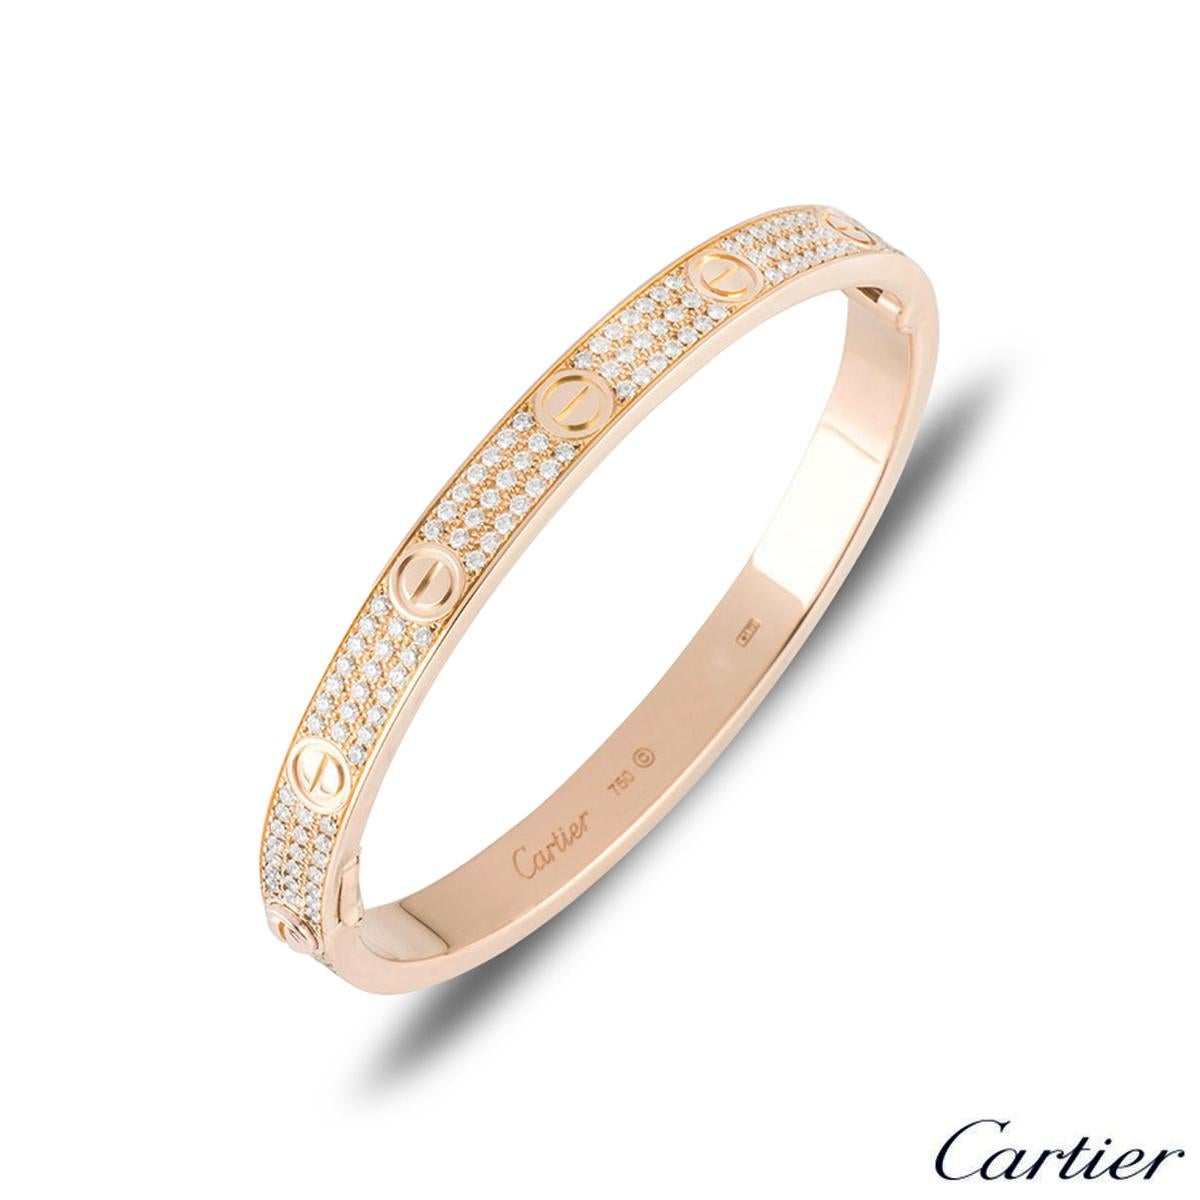 A sparkly 18k rose gold diamond Cartier bracelet from the Love collection. The bracelet comprises of the iconic screw motif on the outer edge complemented with 204 round brilliant cut diamonds throughout, in a pave setting. The diamonds have a total